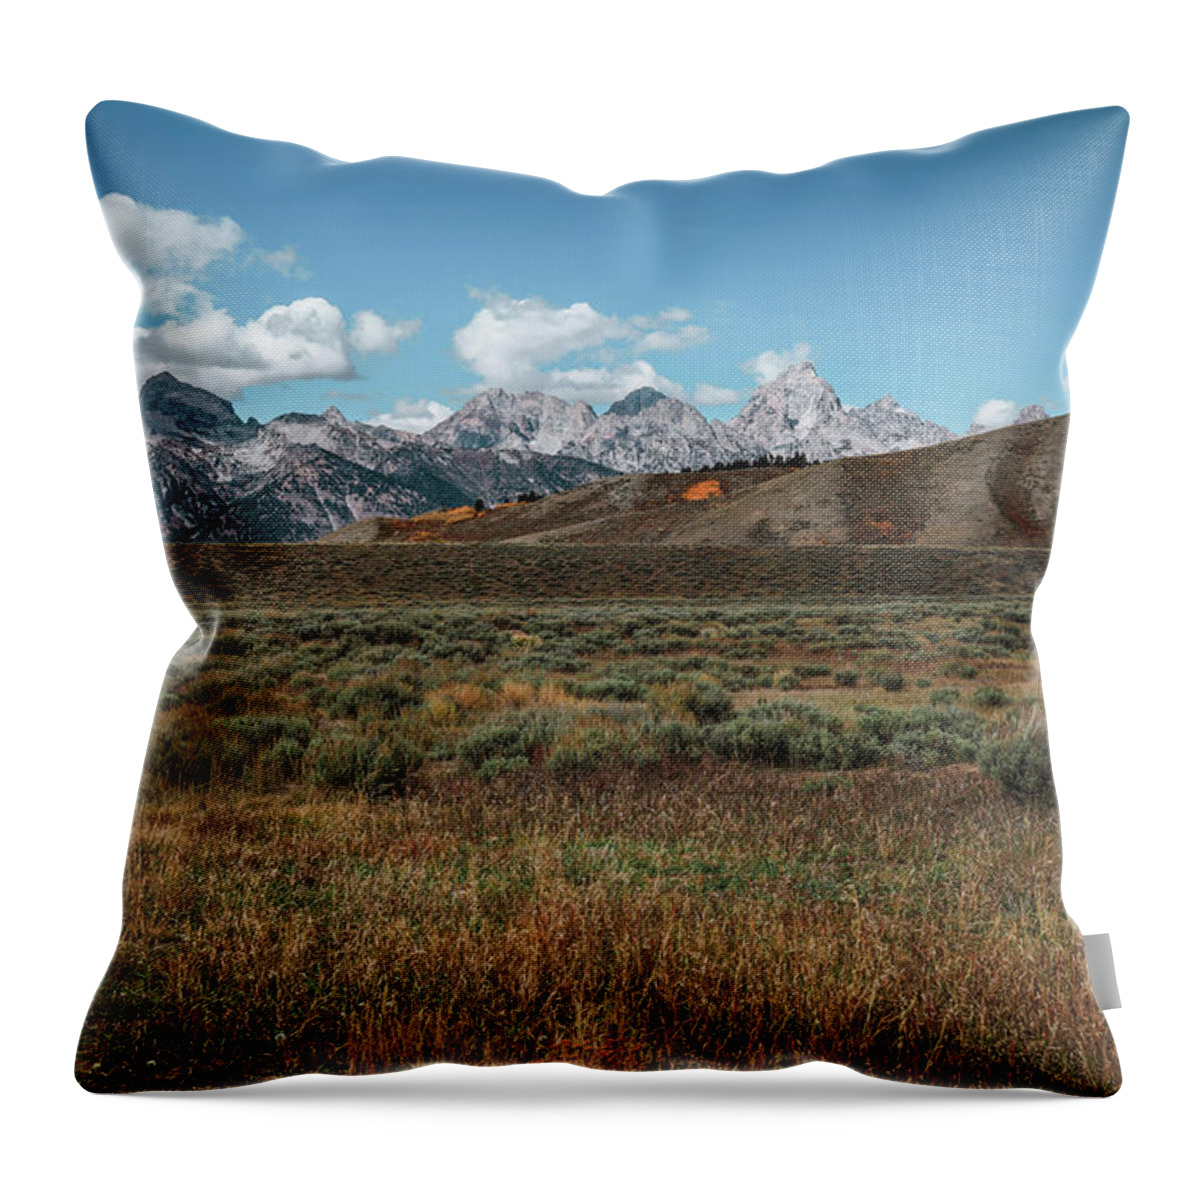 Beautiful Autumn Landscape In Grand Teton National Park Throw Pillow featuring the photograph Tetons Landscape Wide Angle by Dan Sproul